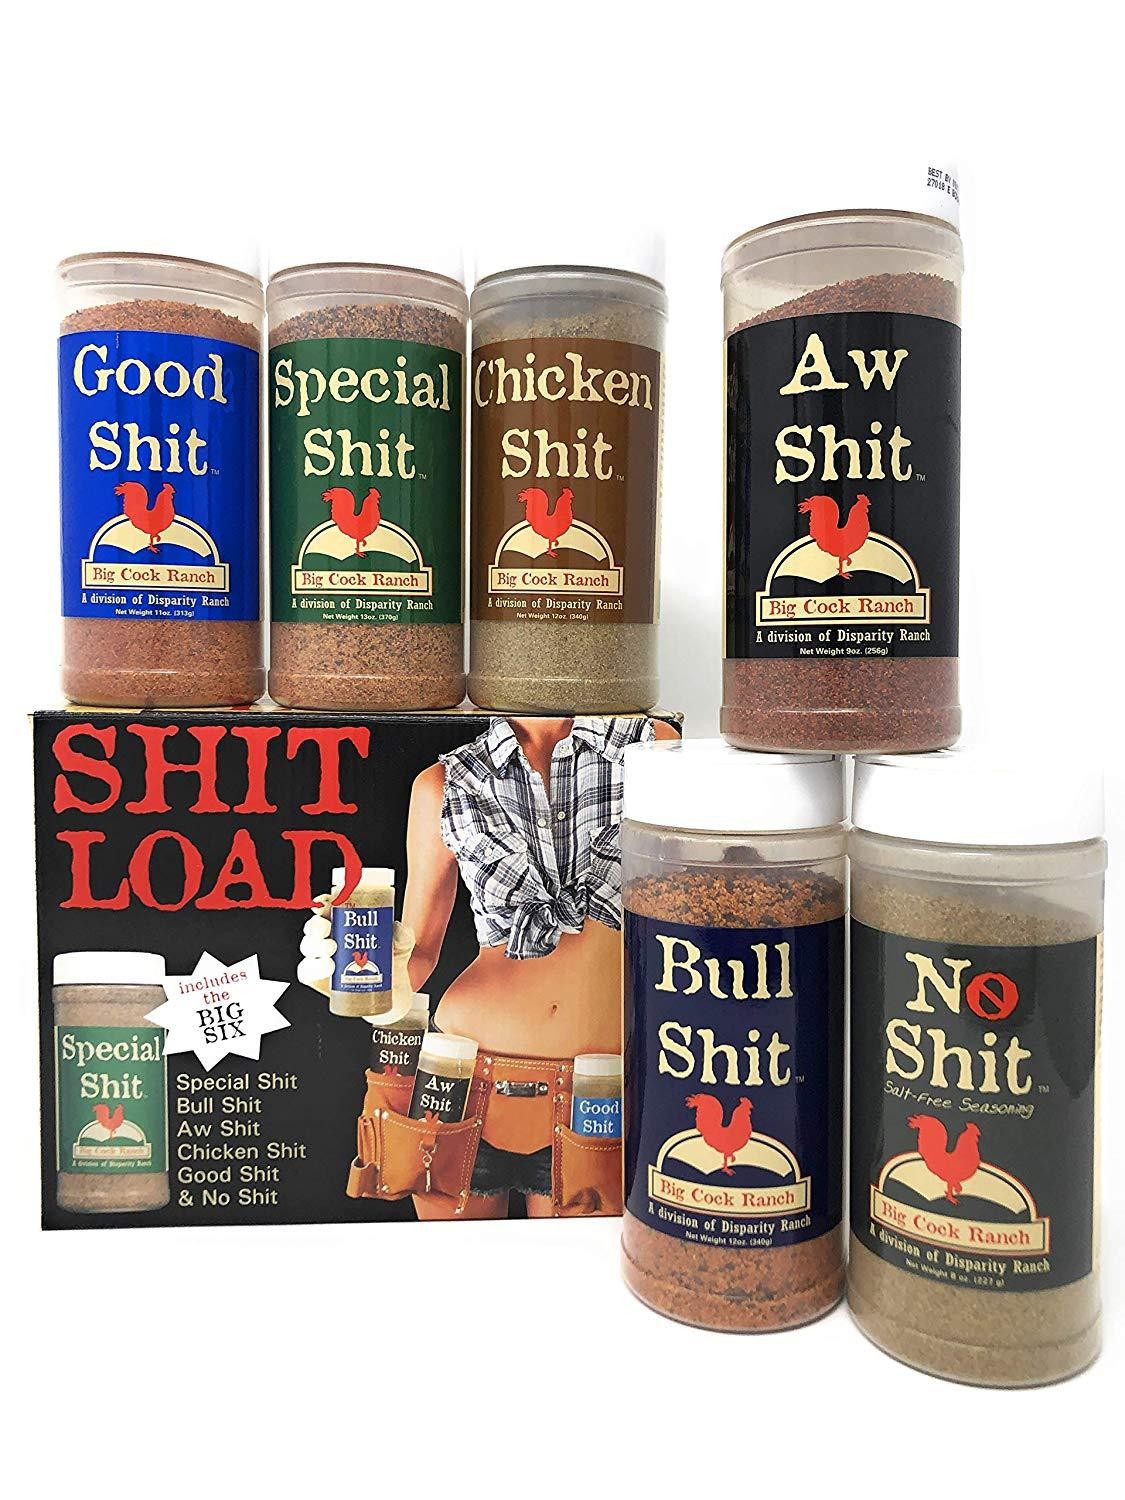 Shit Load Big 6 Sampler (Pack of 6 Seasonings with 1 Each of Bull, Special, Good, Aw, Chicken, and No)